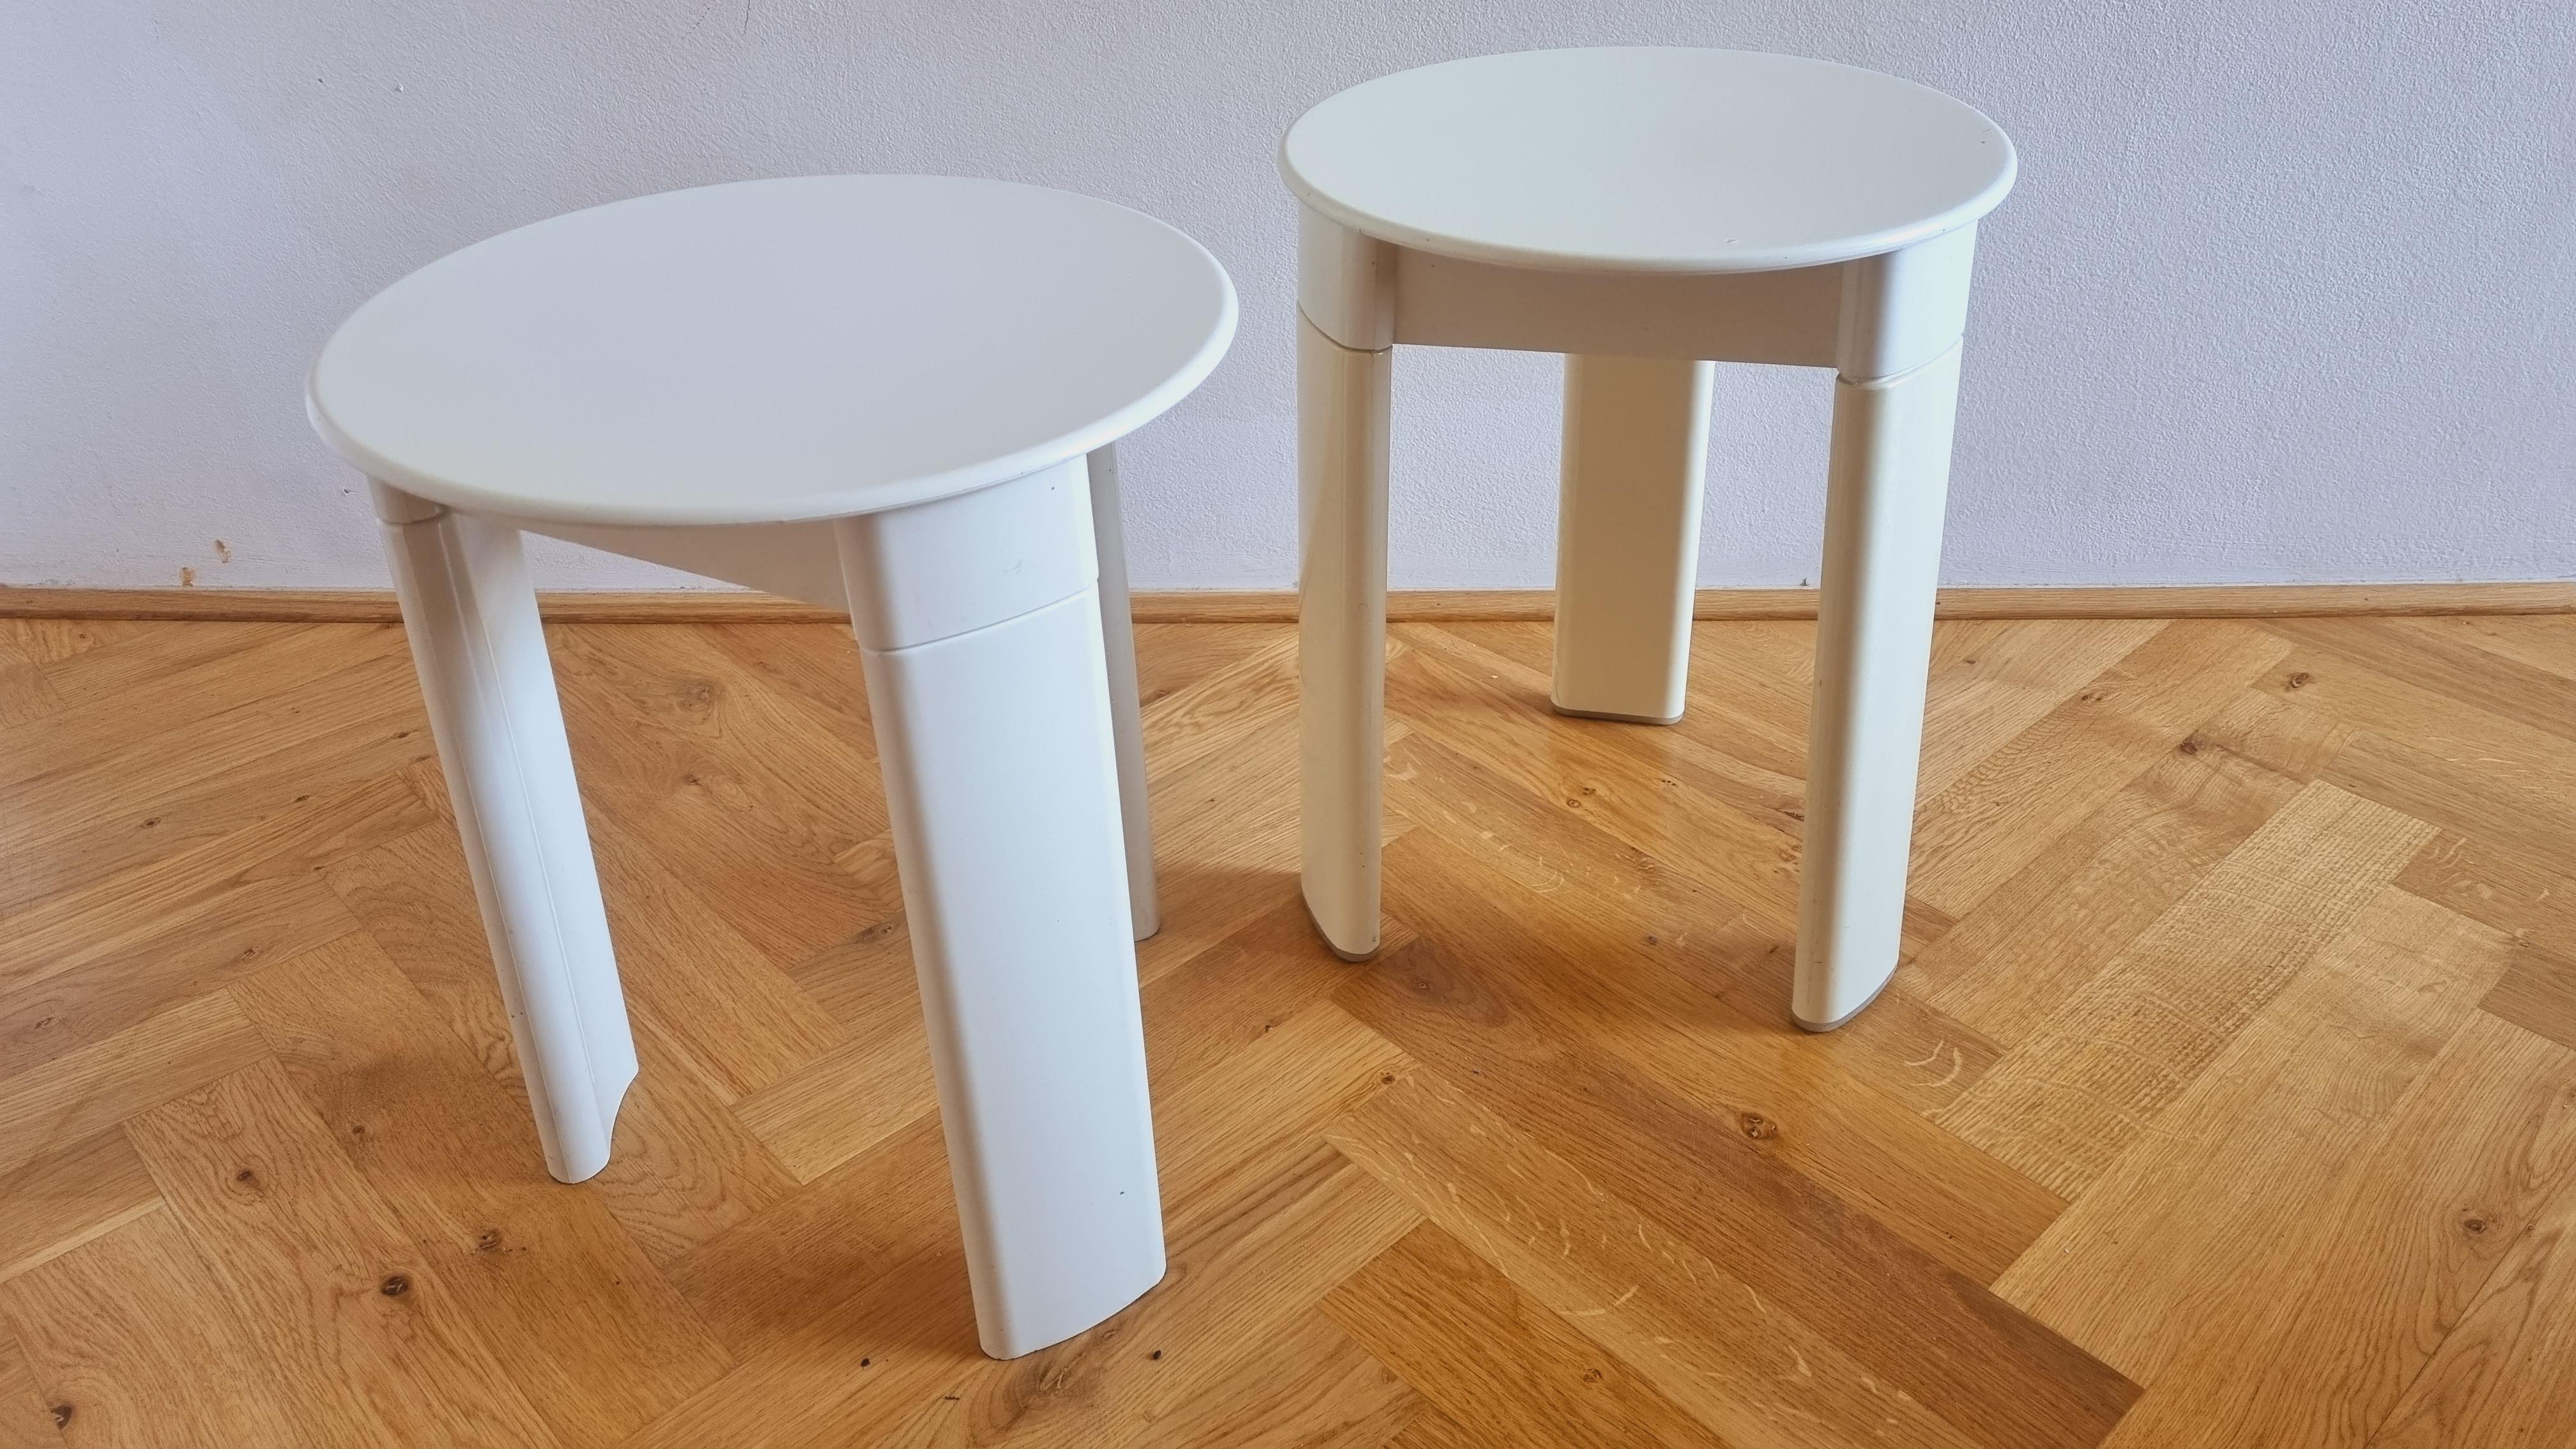 Pair of Midcentury Stools or Side Tables Trio, Olaf Von Bohr, Gedy, Italy, 1970s For Sale 5